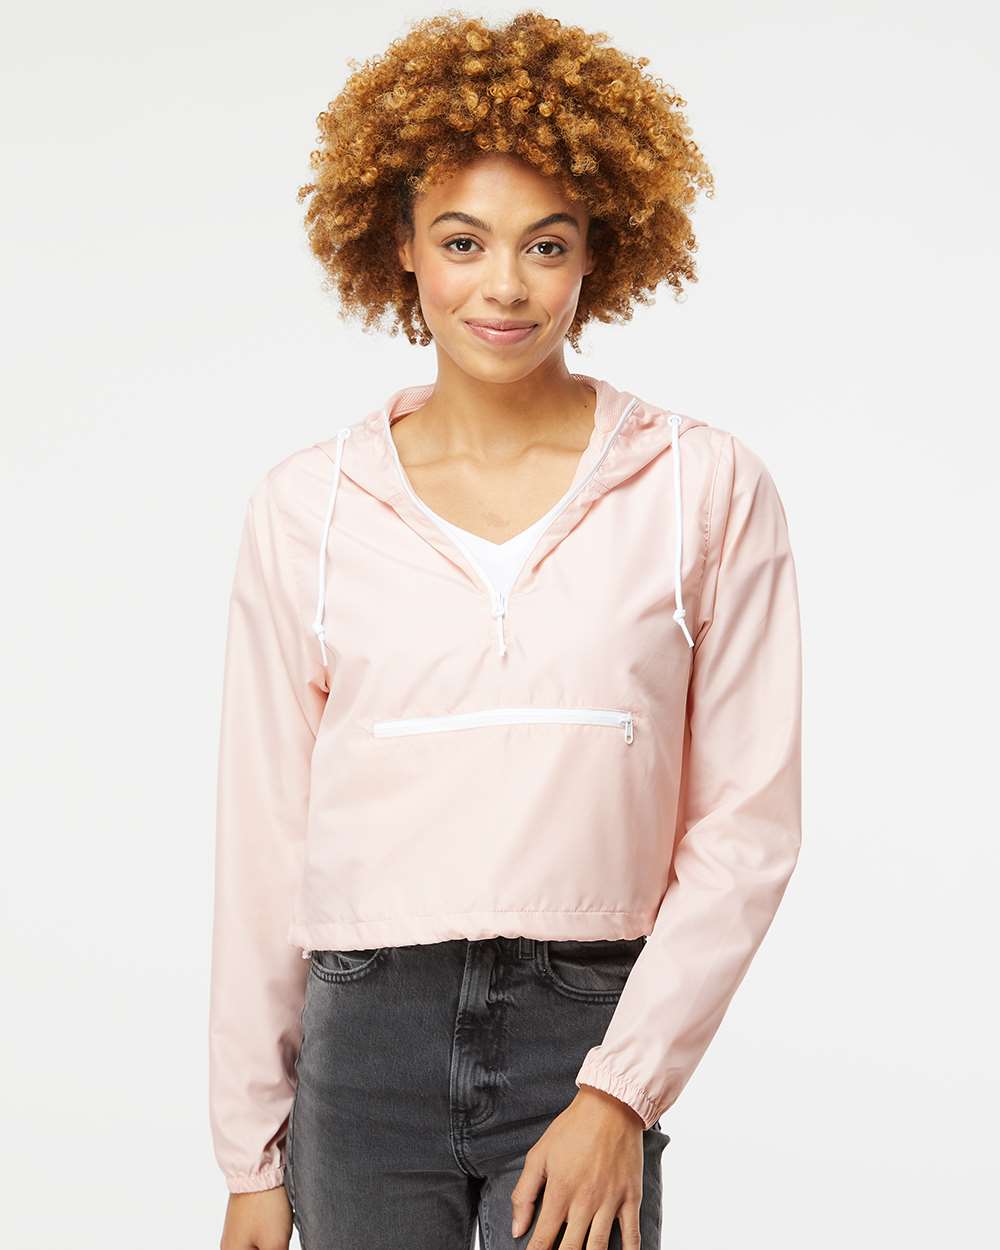 model wearing independent trading co womens 1/4-zip crop windbreaker in blush white